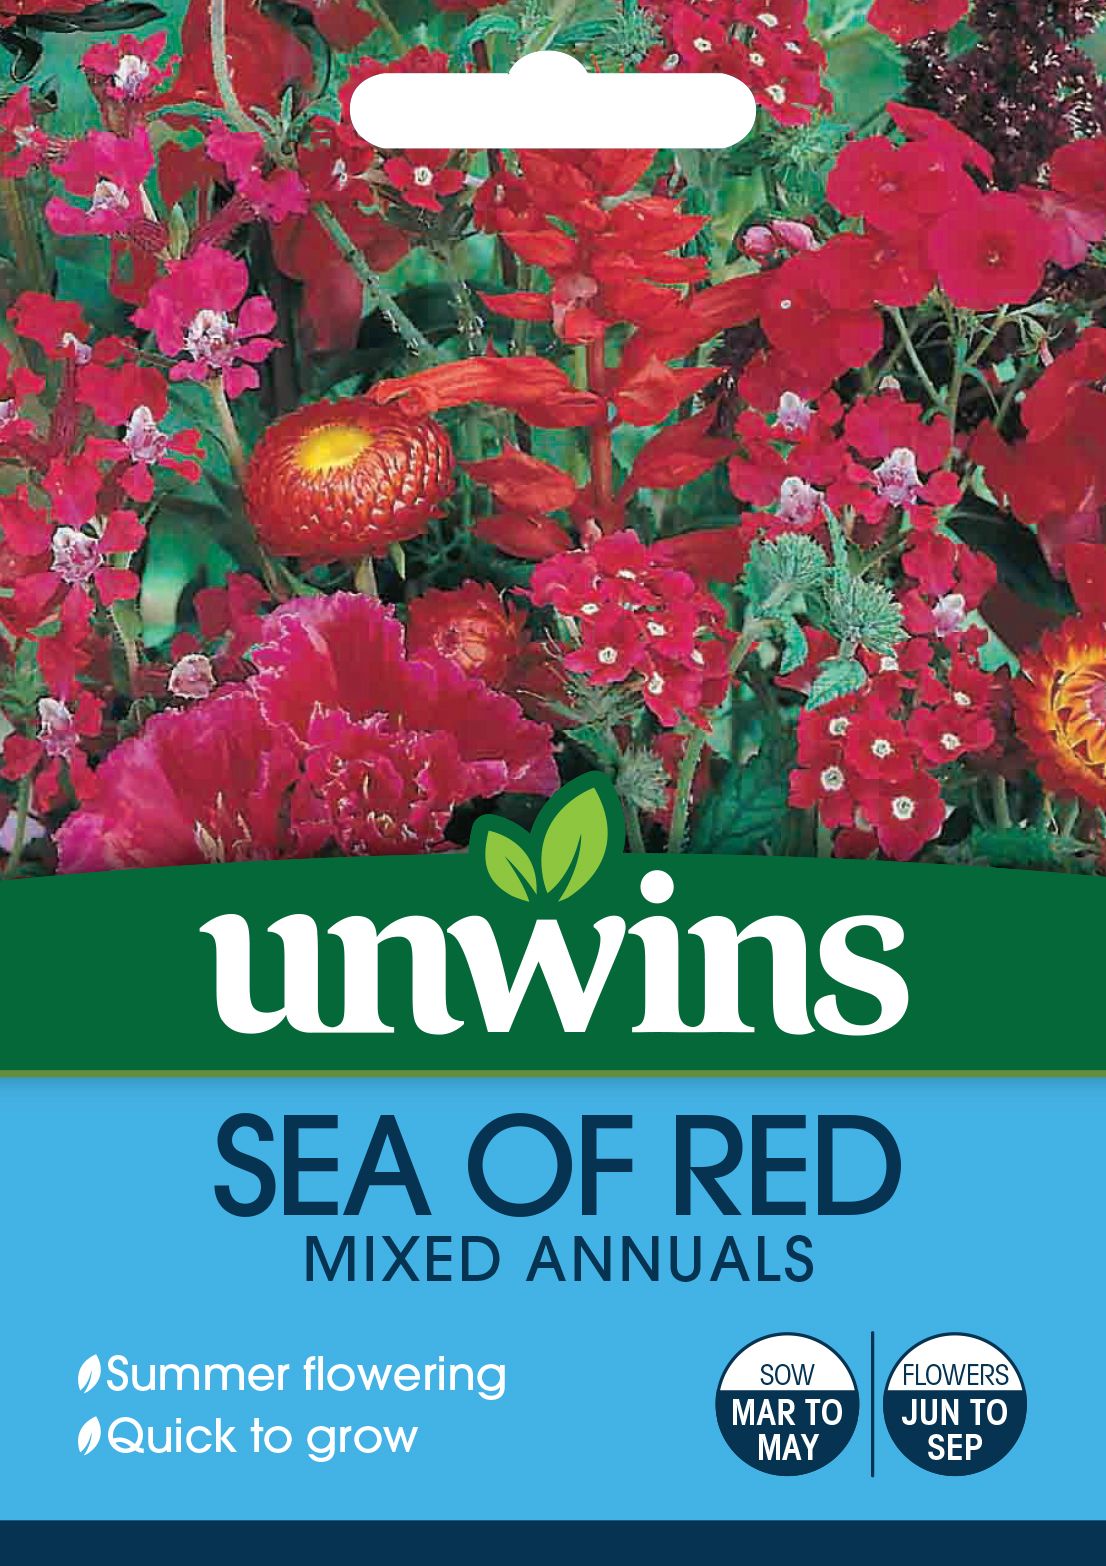 Unwins Sea of Red Mixed Annuals